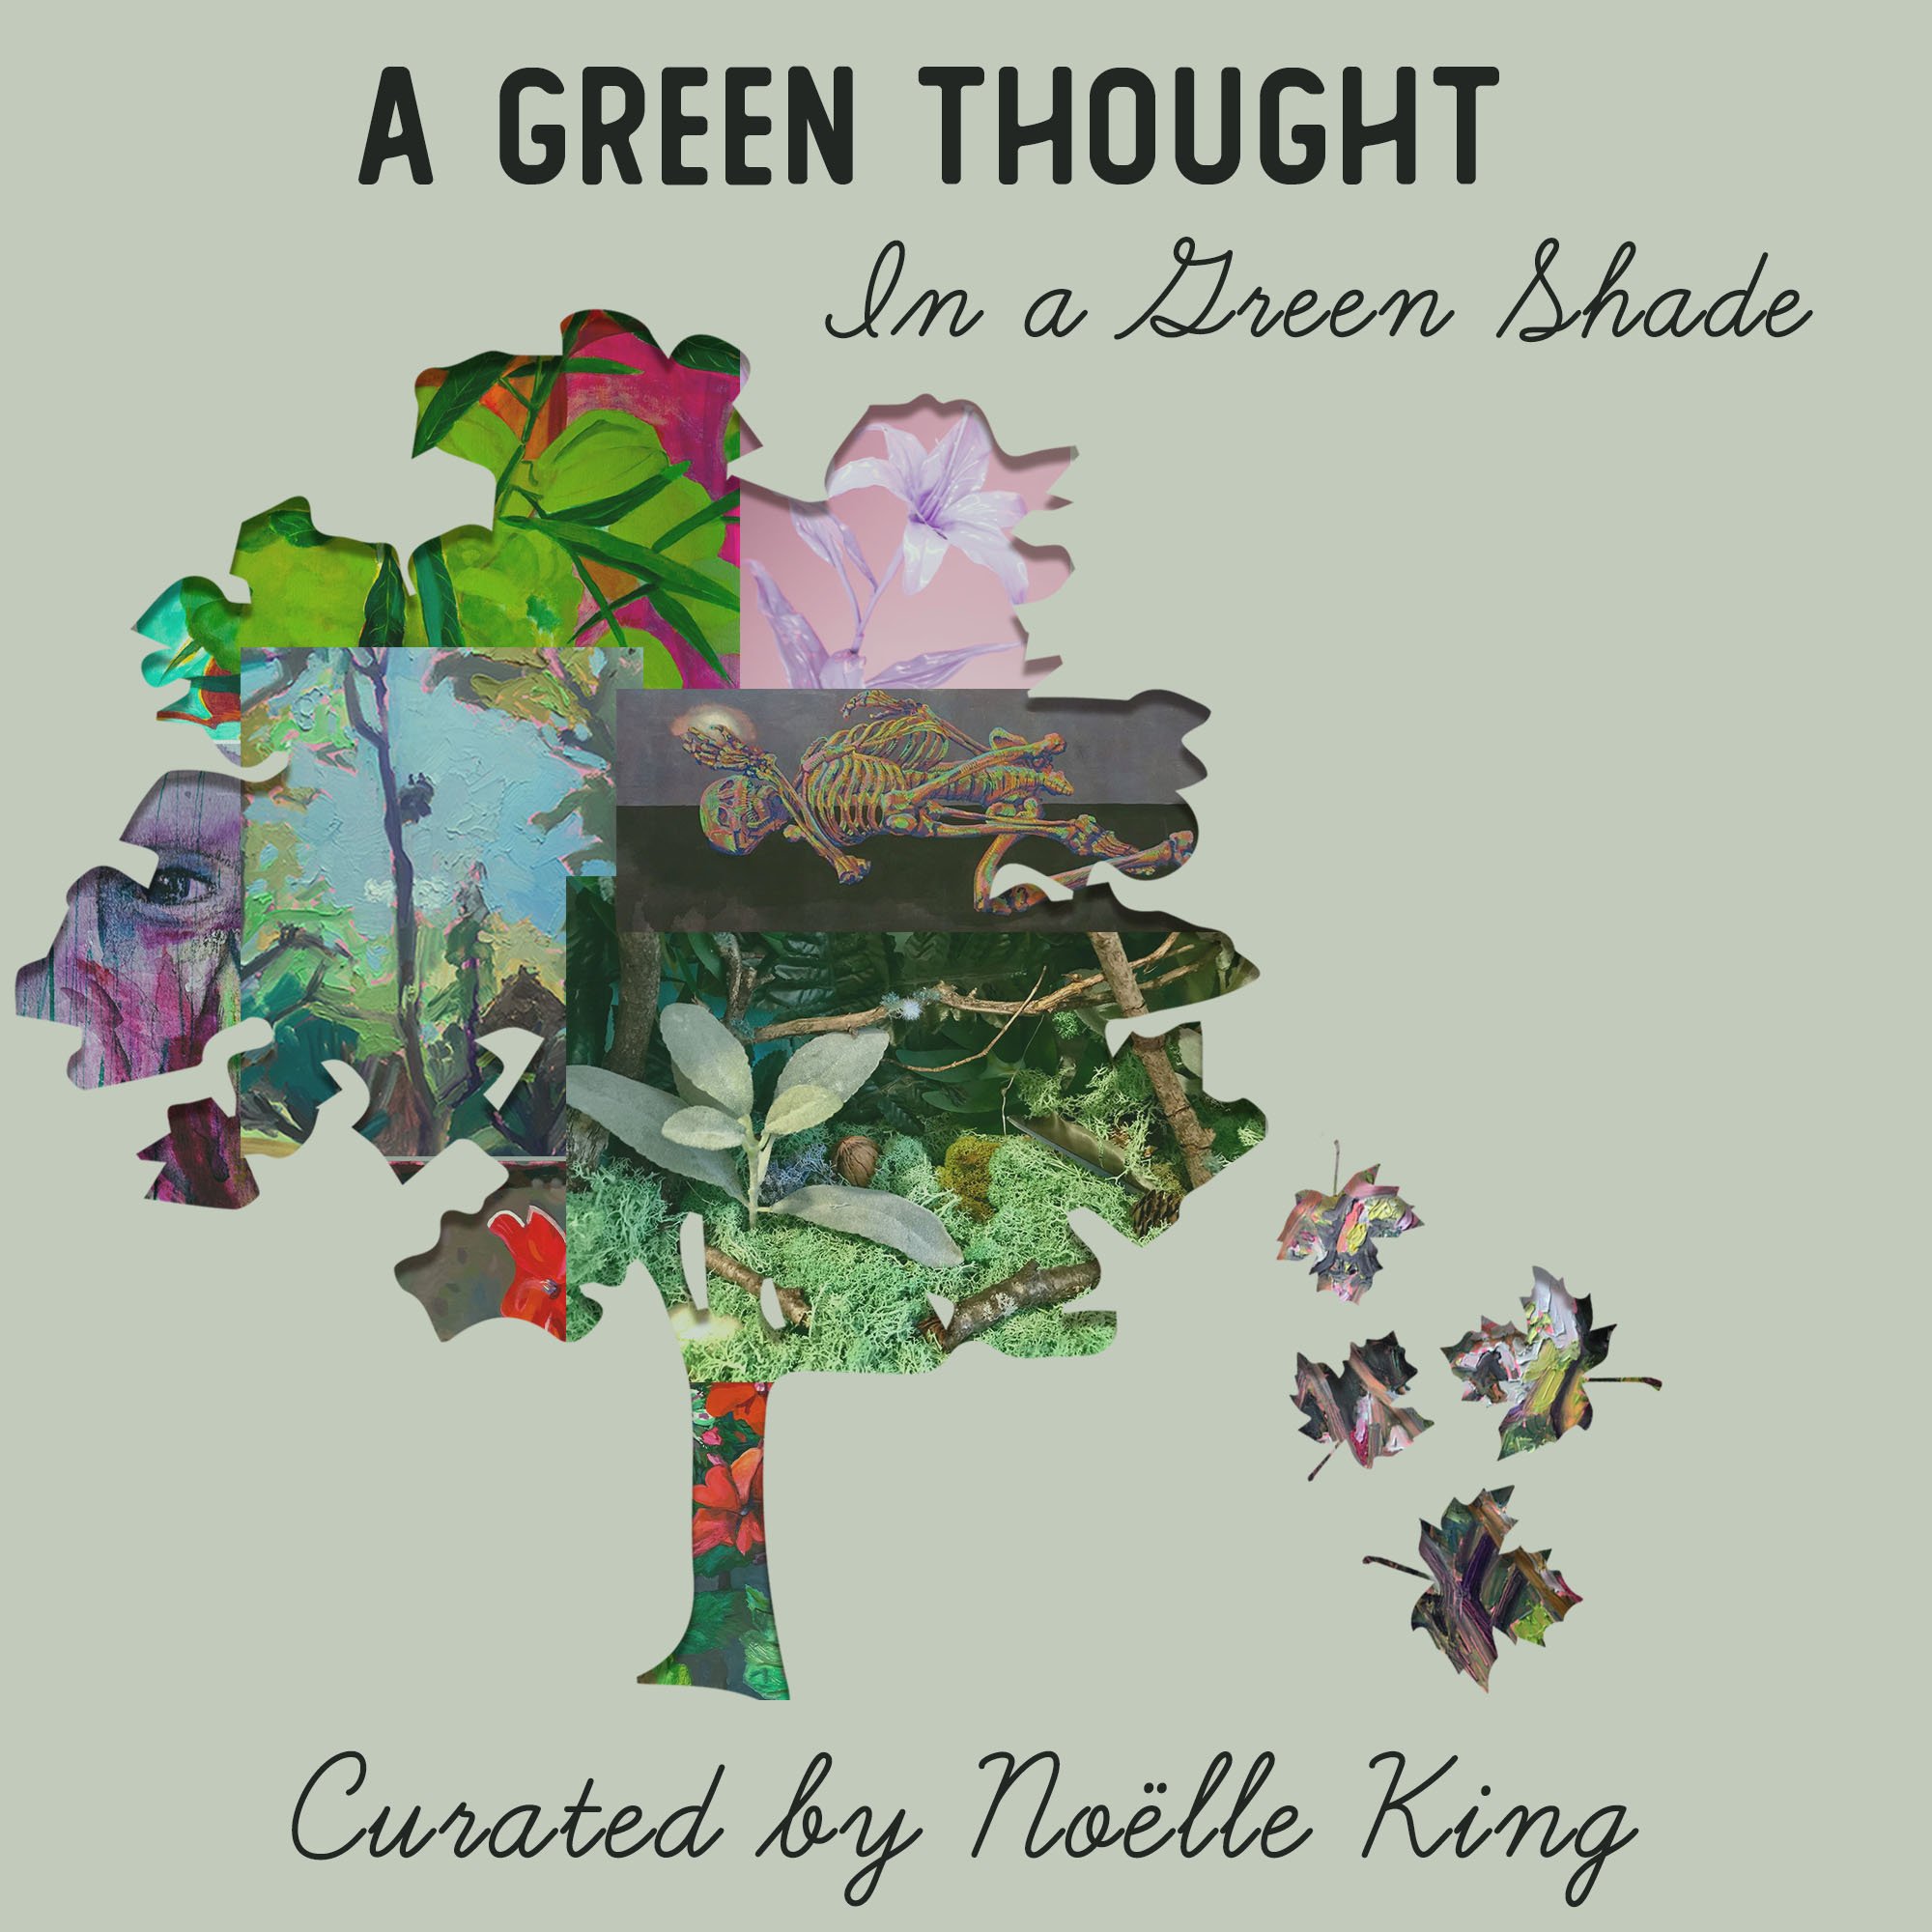 To a Green Thought in a Green Shade